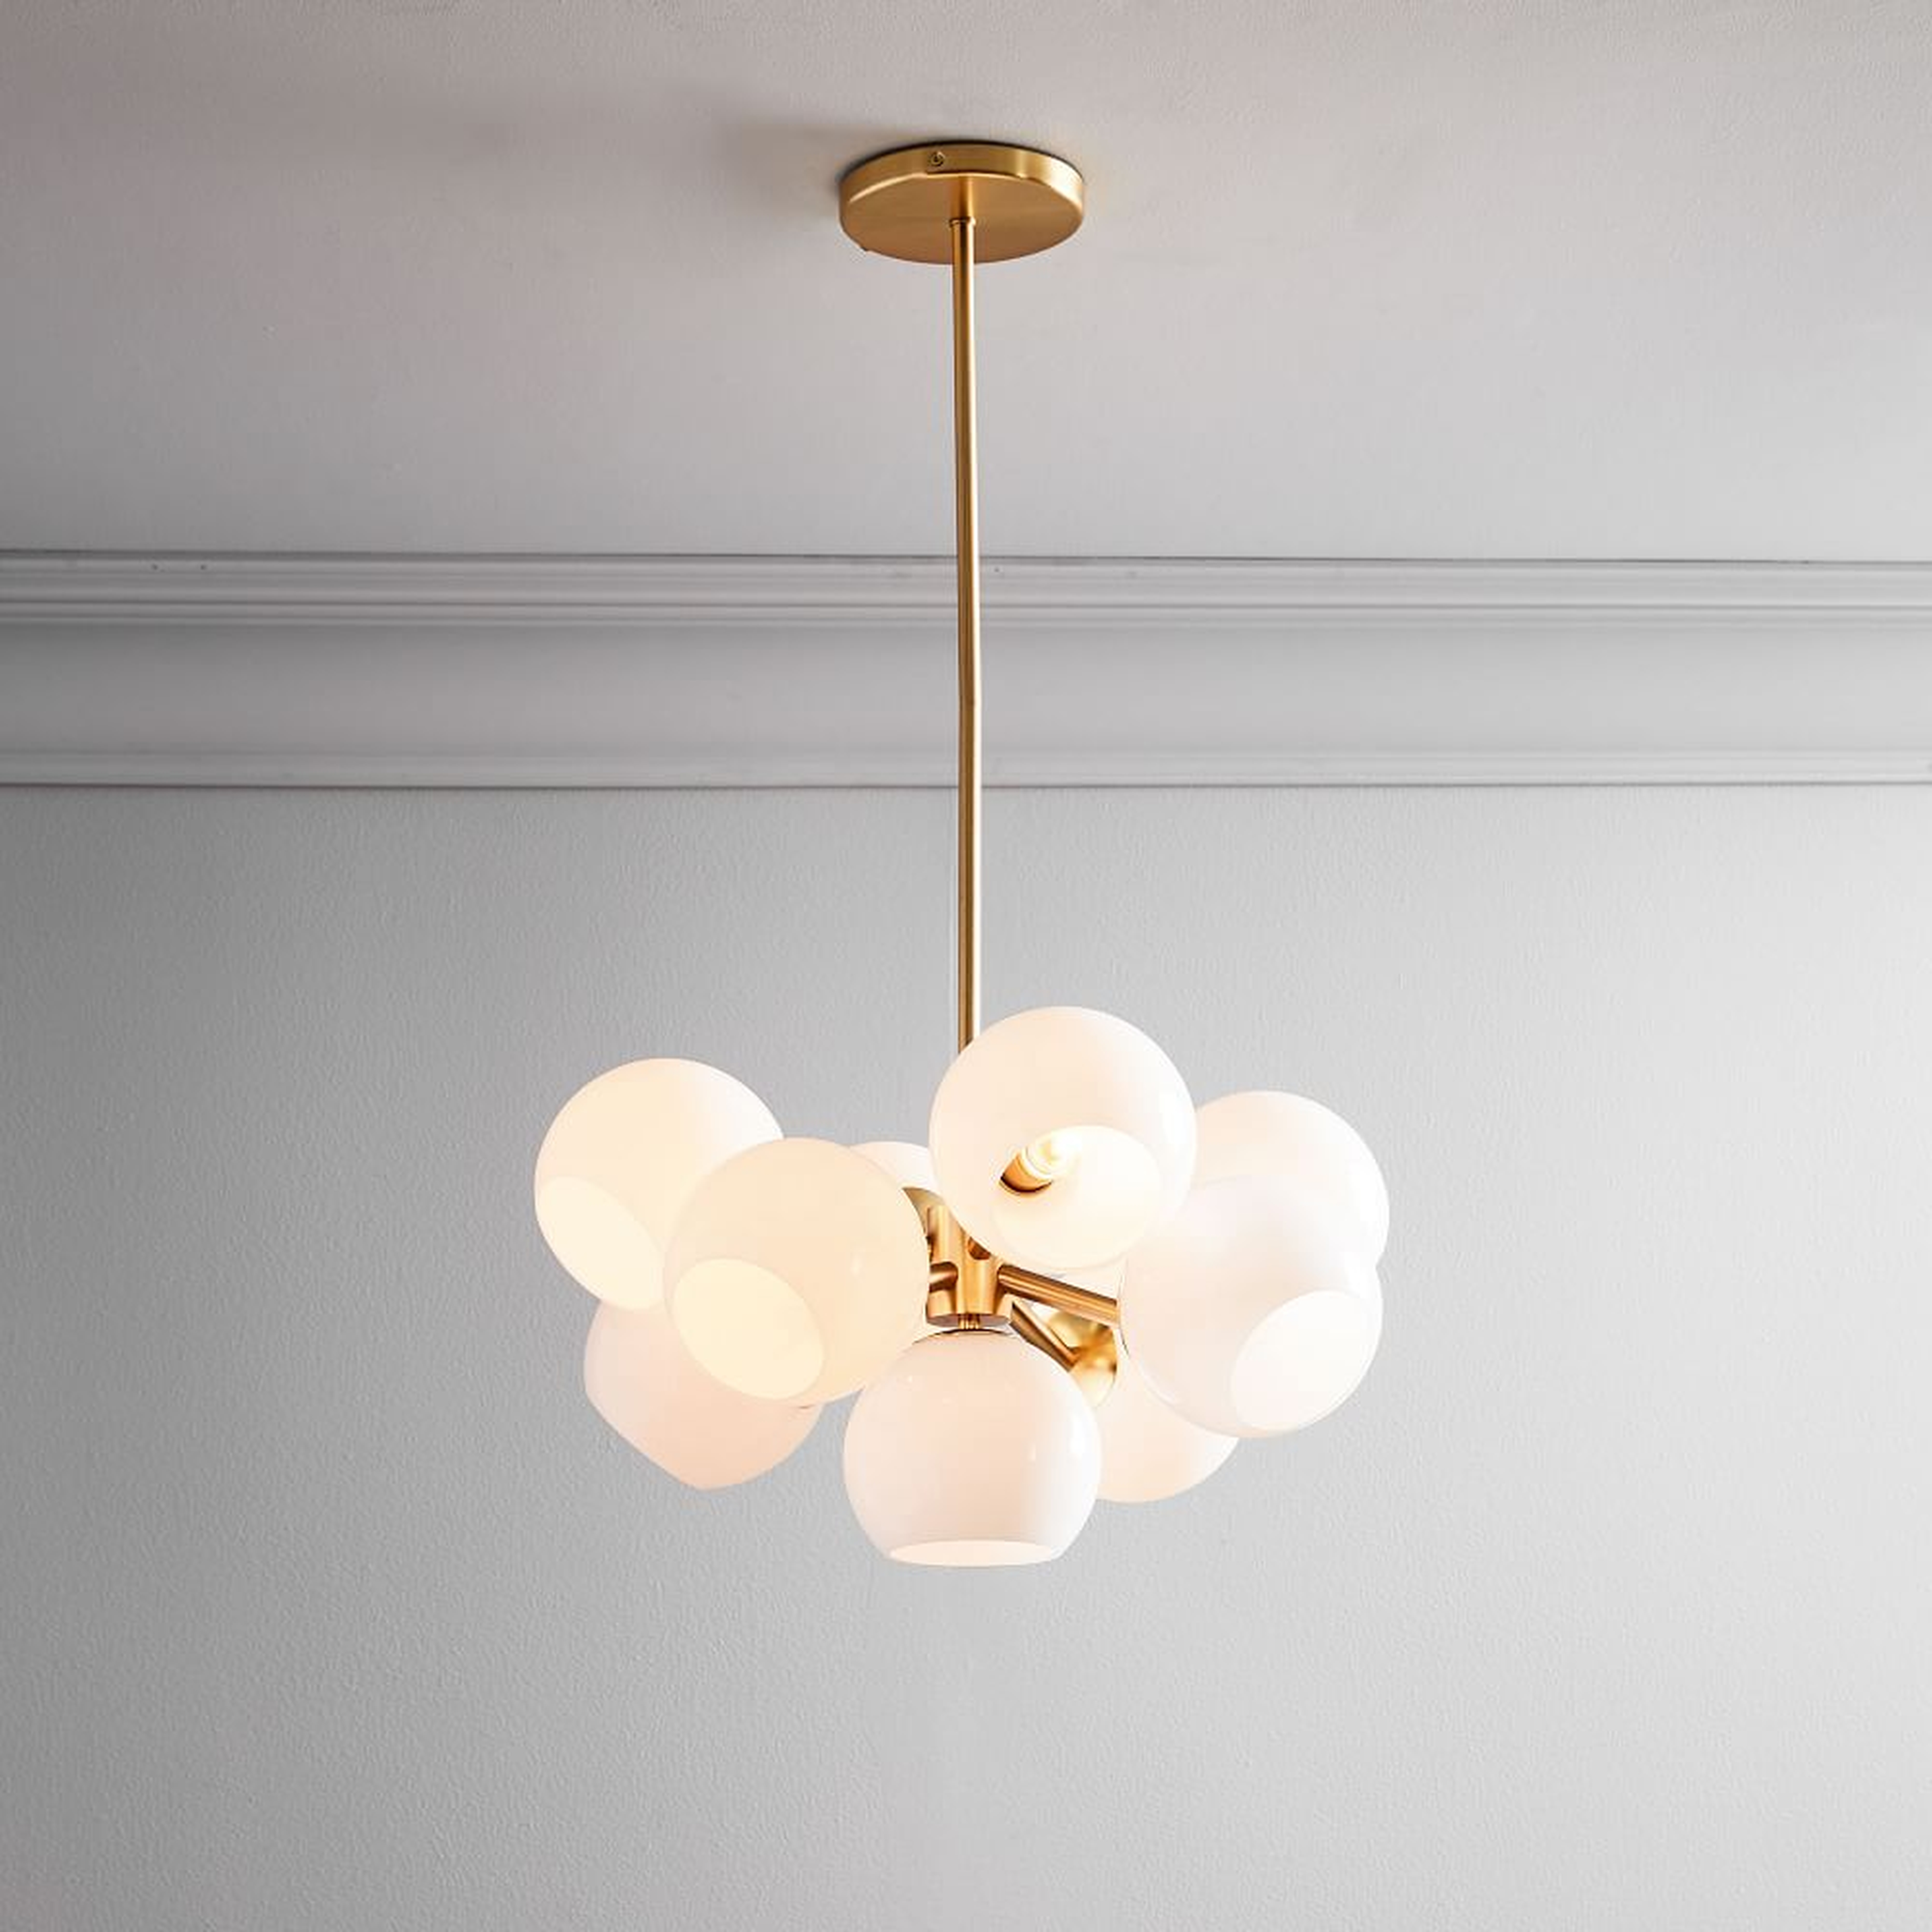 Staggered Glass Chandelier With Light Bulb, Milk Glass, Brass - West Elm